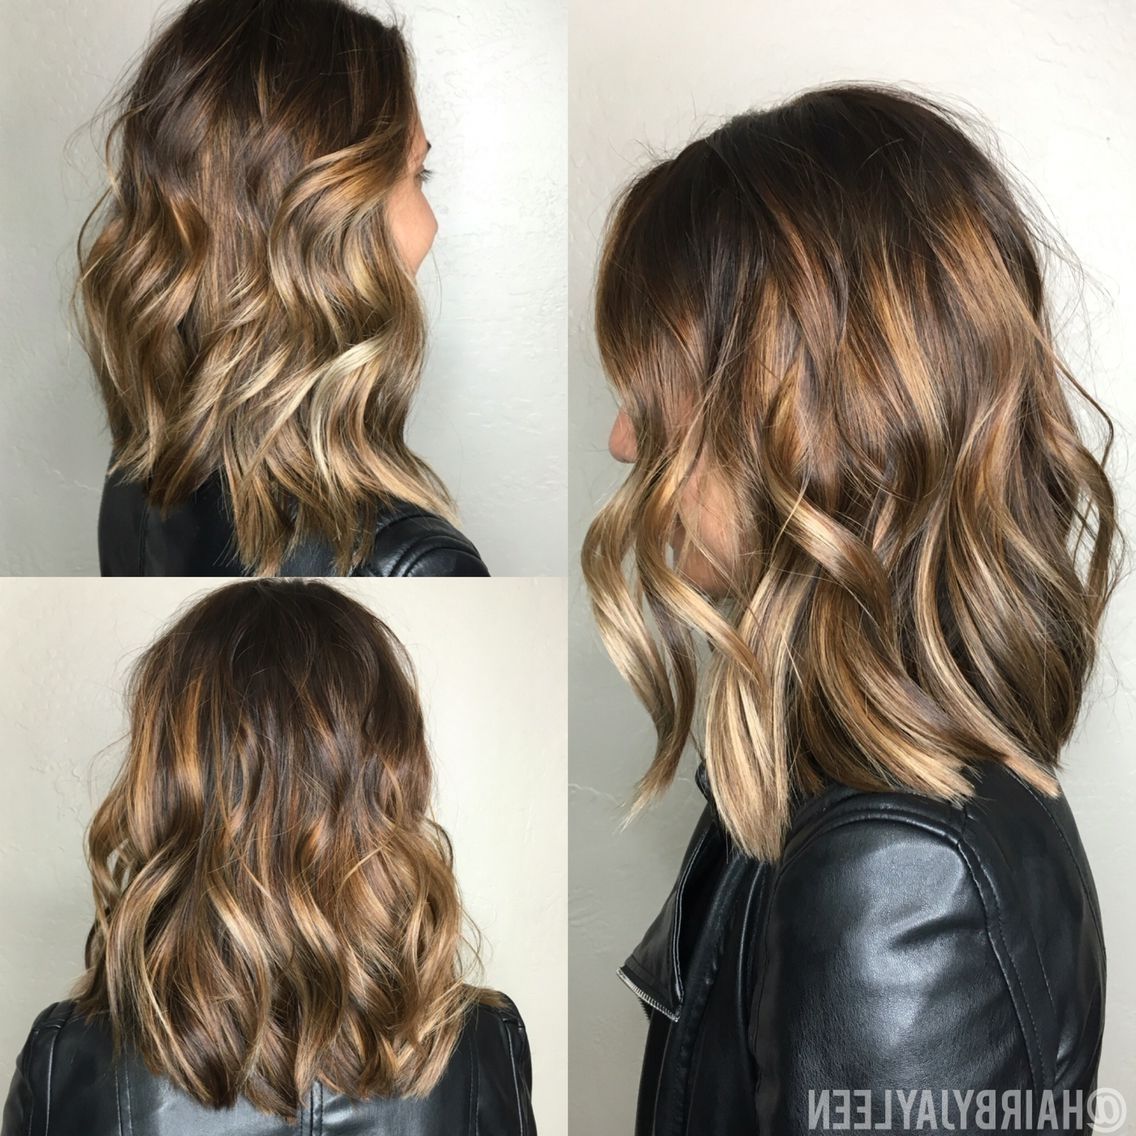 Lob Hairstyle, Short Hair Color, Blonde Balayage, Bronde Hair With Regard To Well Known Bronde Beach Waves Blonde Hairstyles (Gallery 19 of 20)